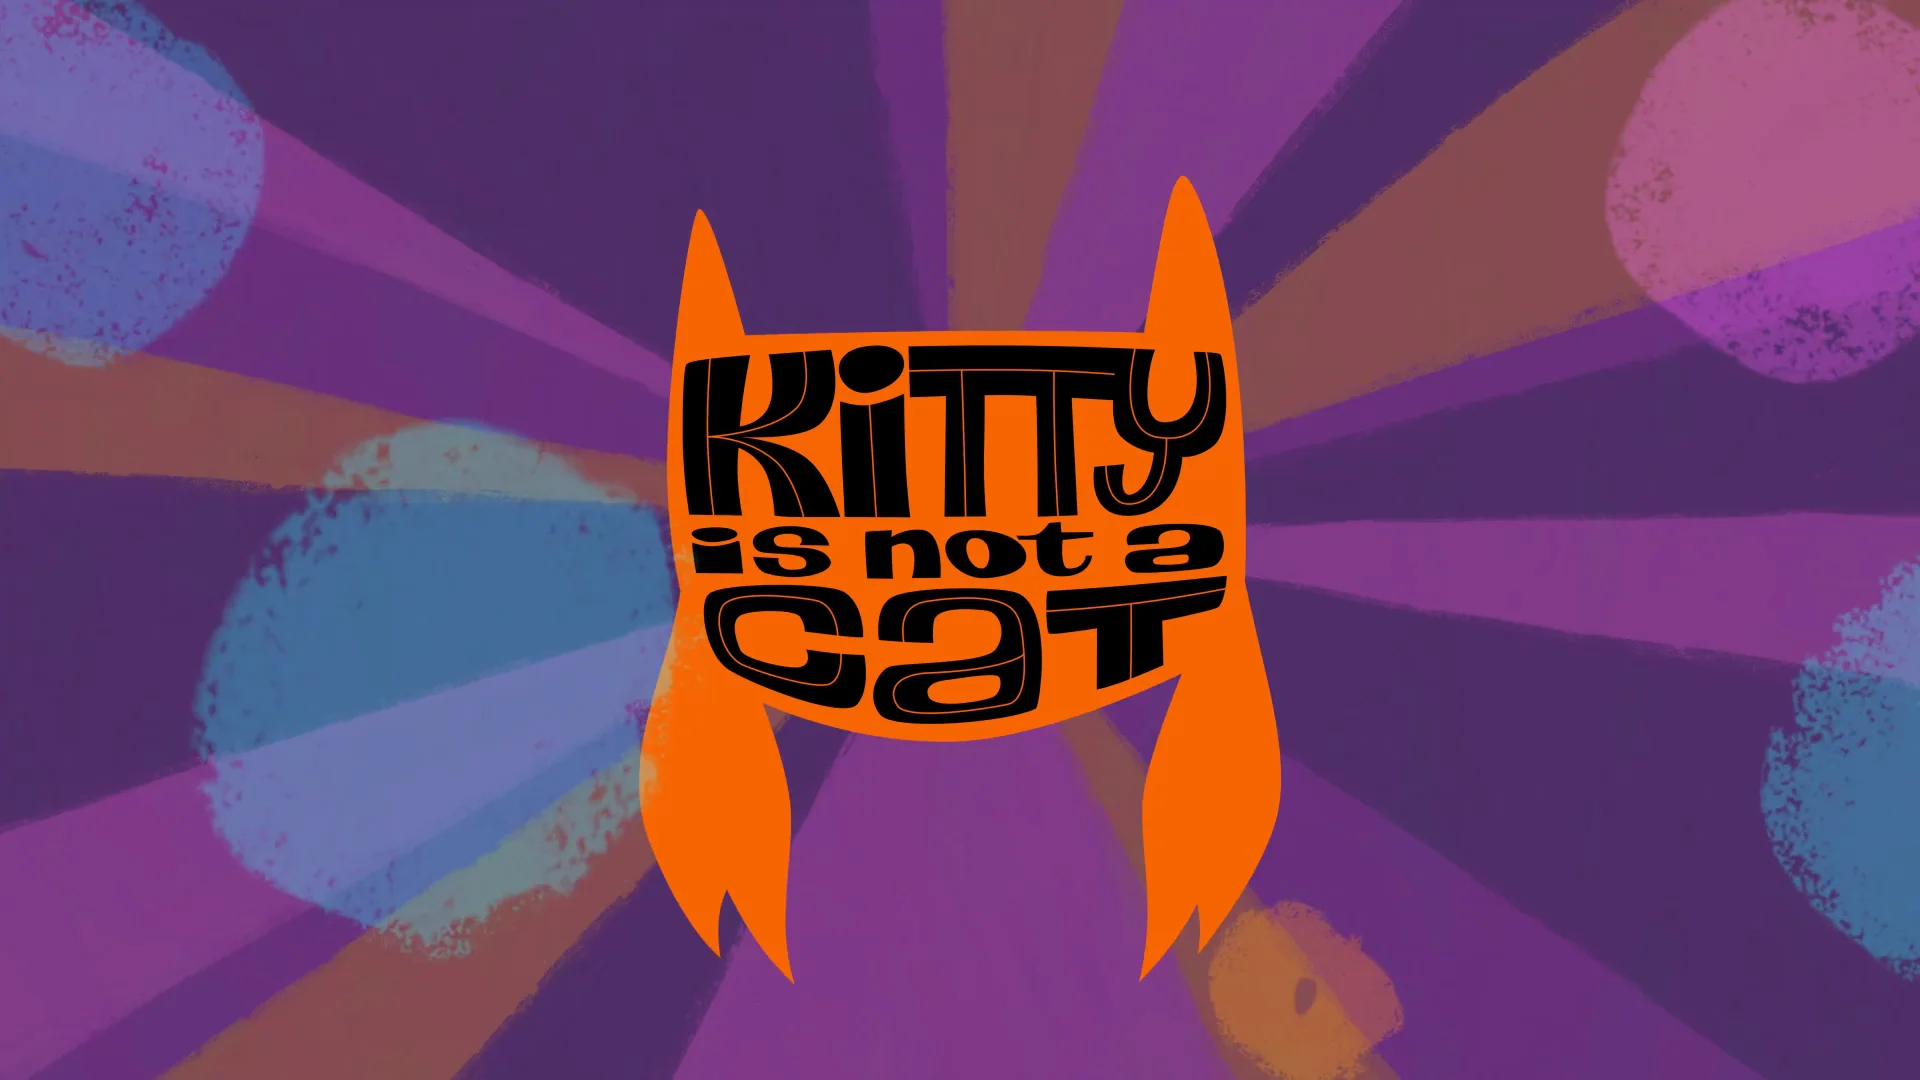 Kitty Is Not a Cat